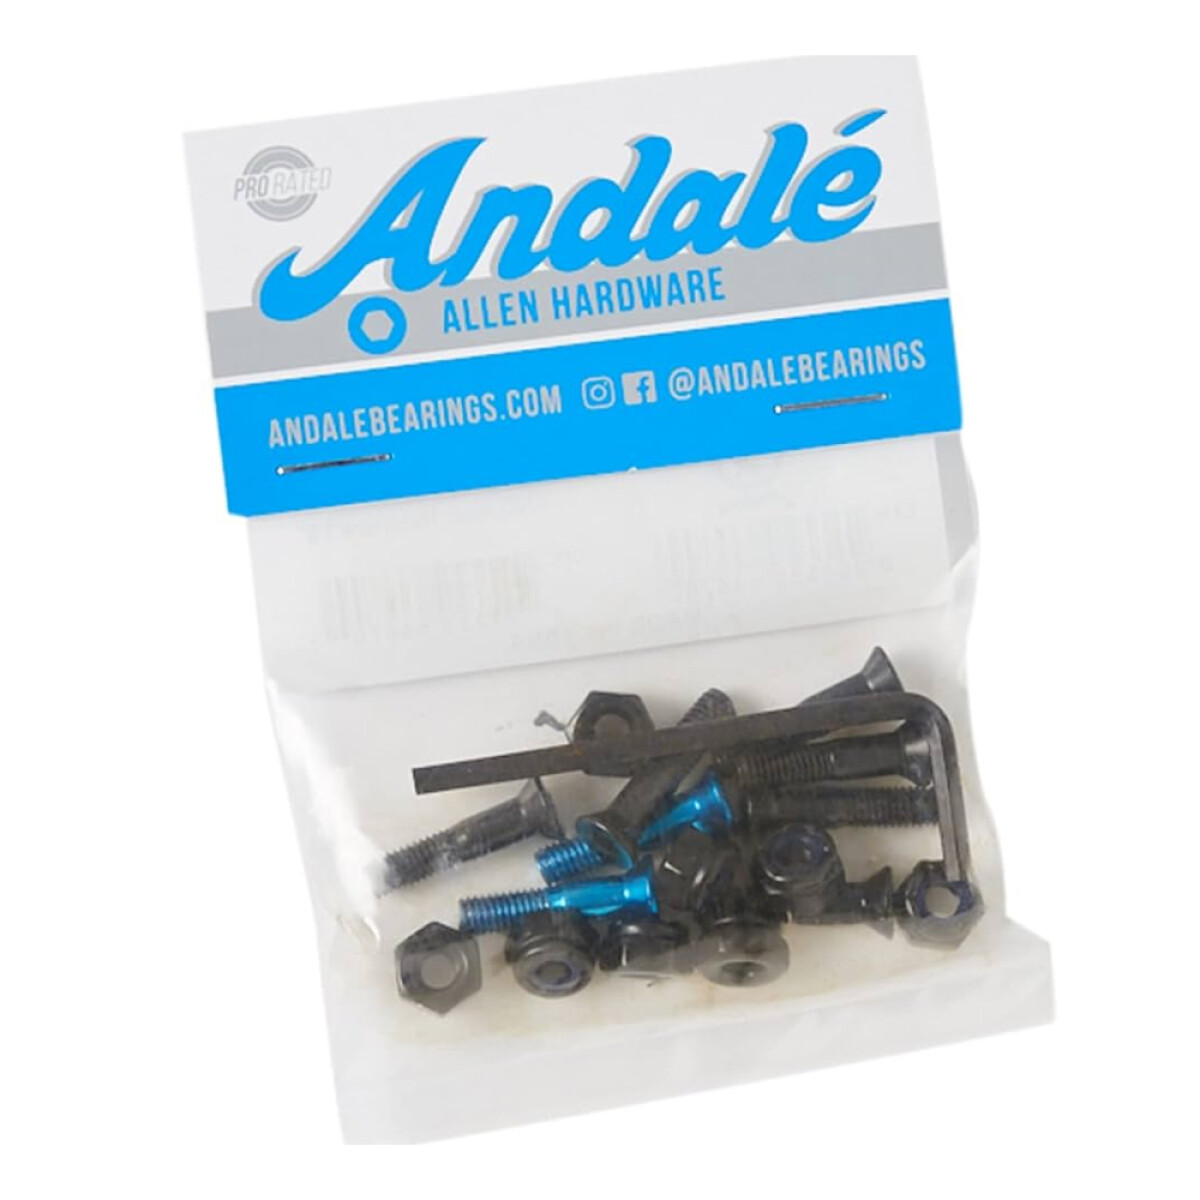 Tornillos Andale Allen Hardware 7/8" 